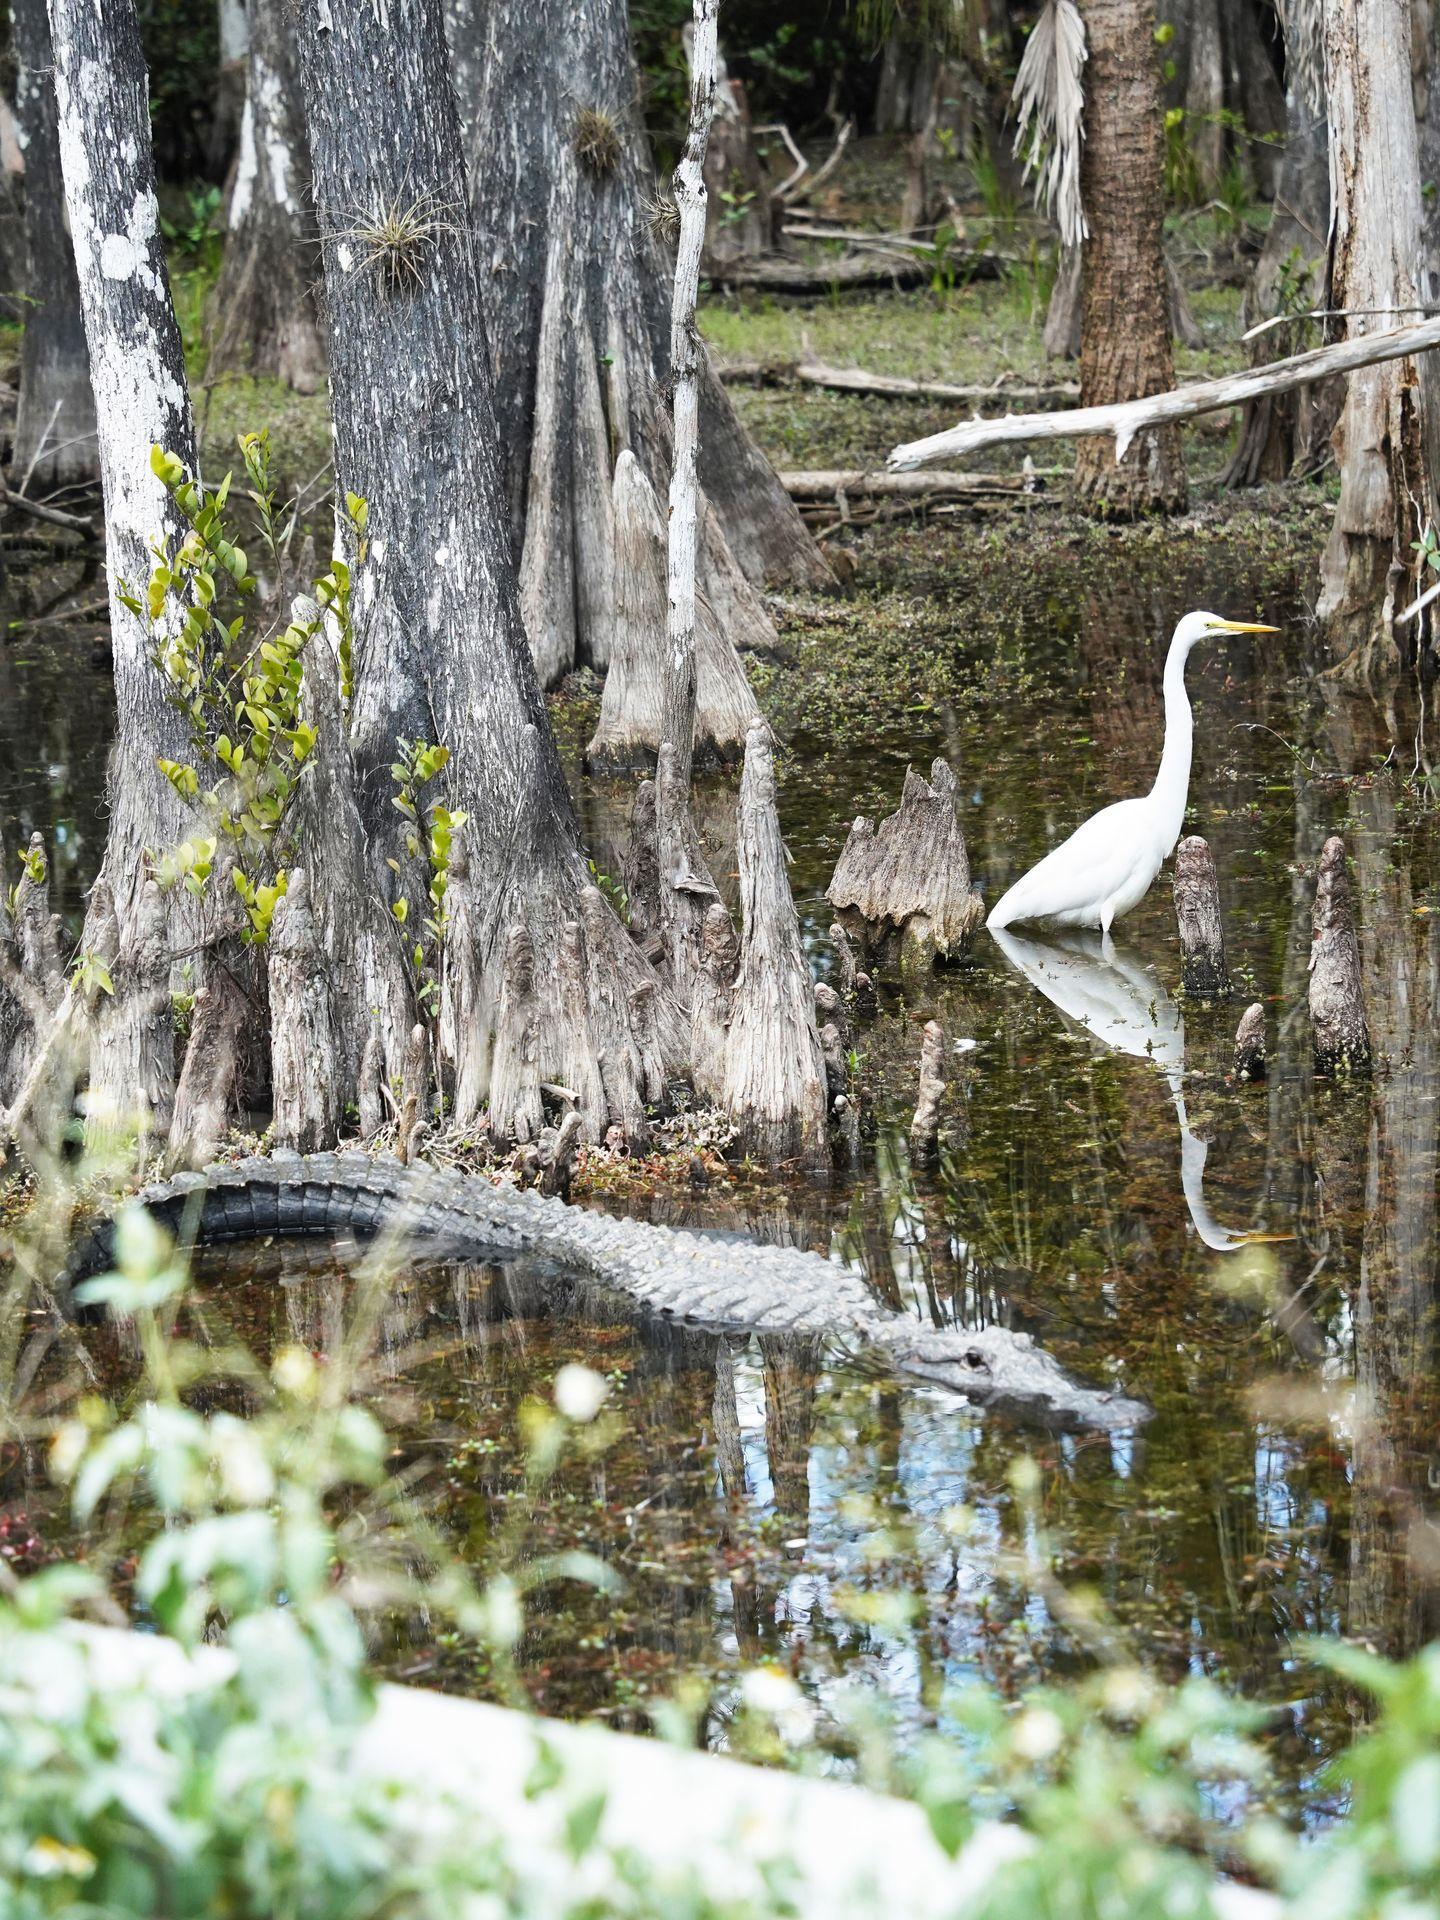 An alligator and a white bird in the water surrounded by cypress trees. A view on the Scenic Loop Drive in Big Cypress.